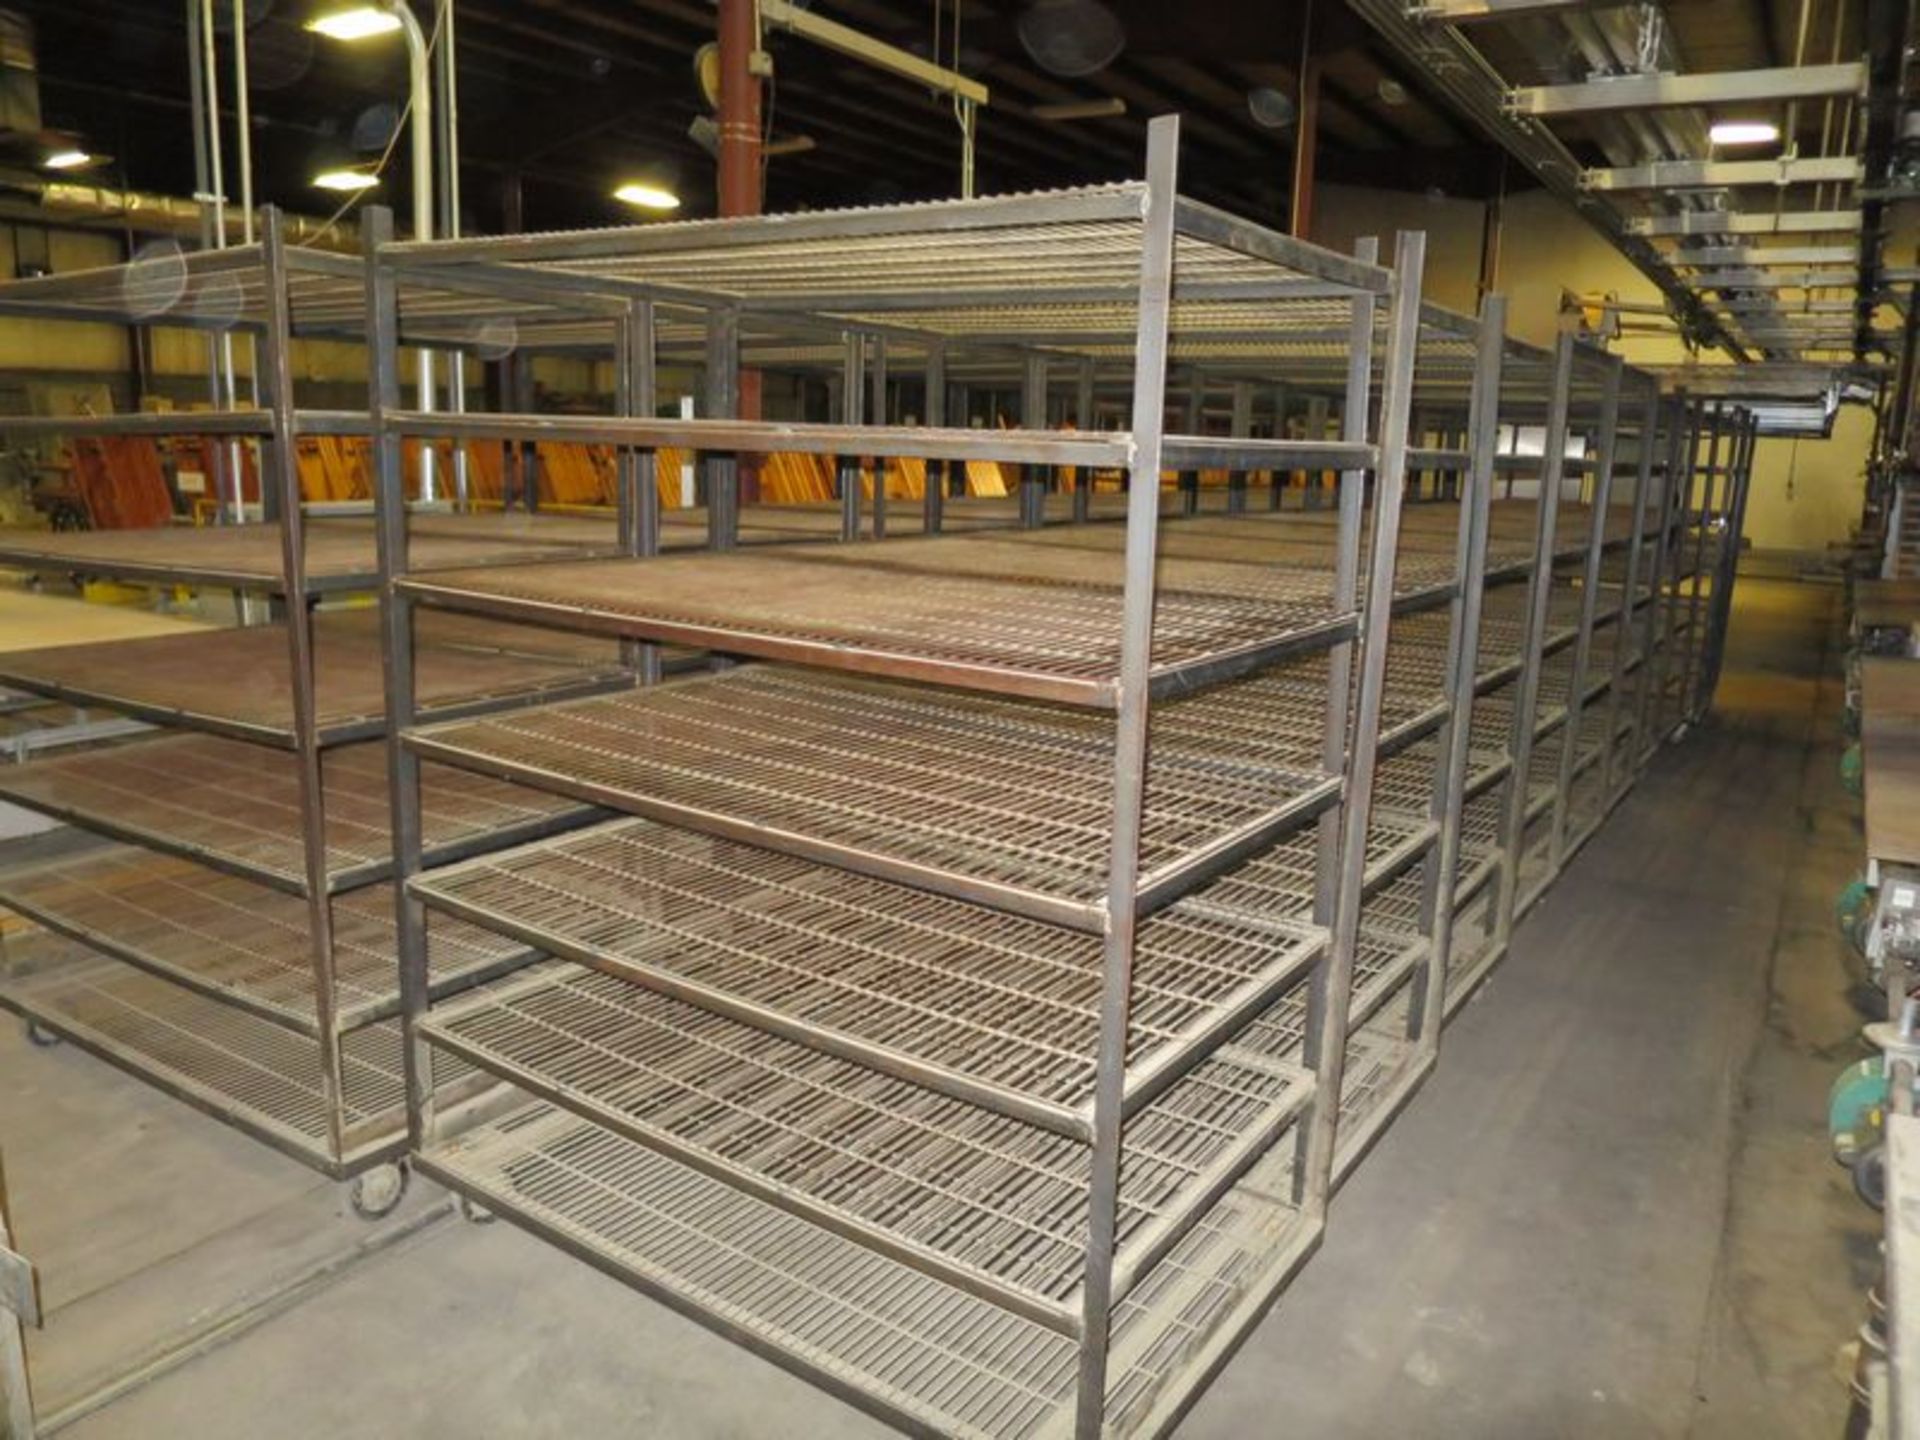 Lot of (20) 7-Tier mobile cooling racks, 9' L x 3' w x 6' high